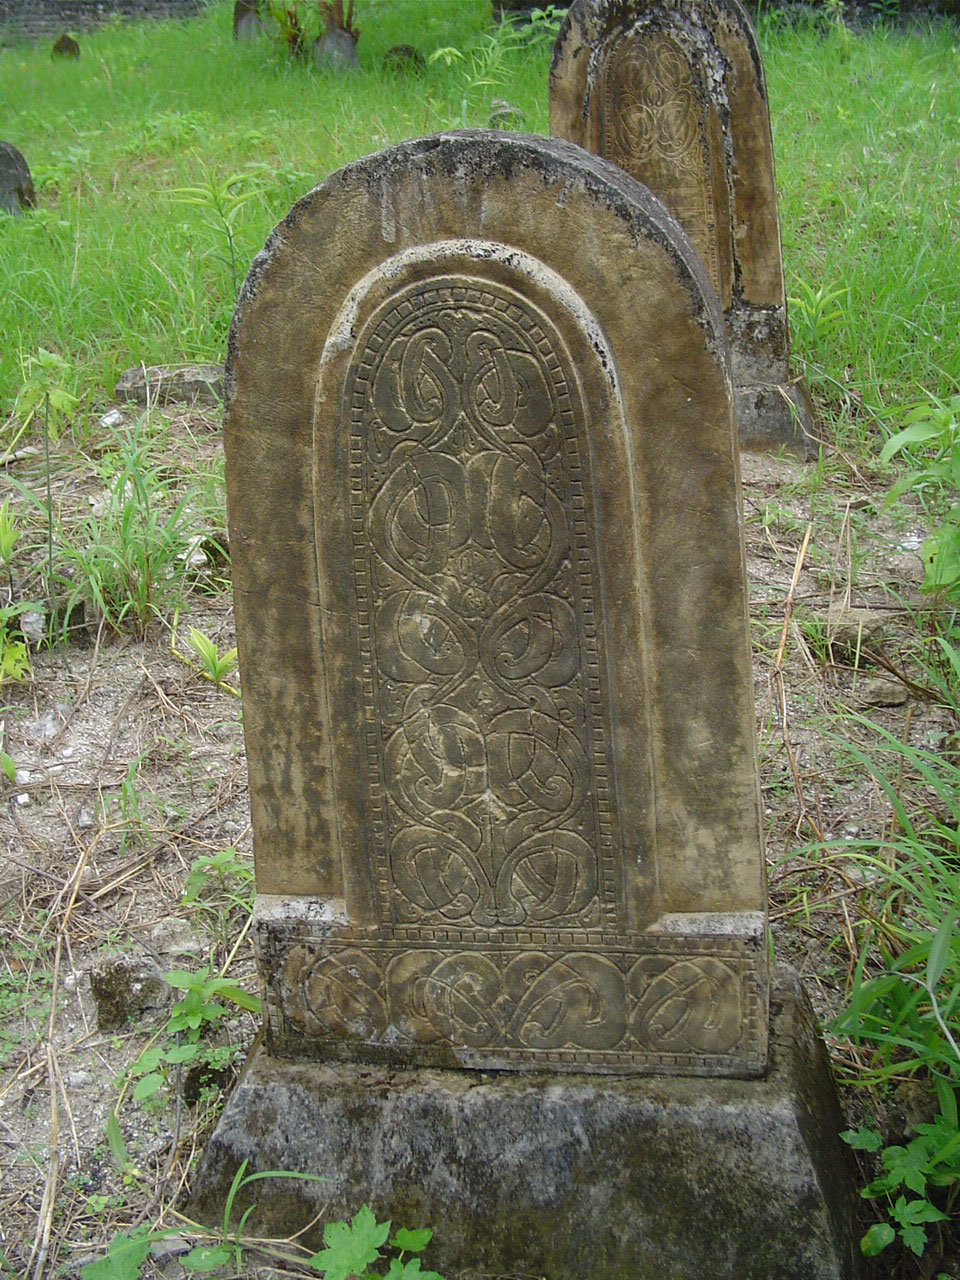 a stone marker in a grassy area with some plants